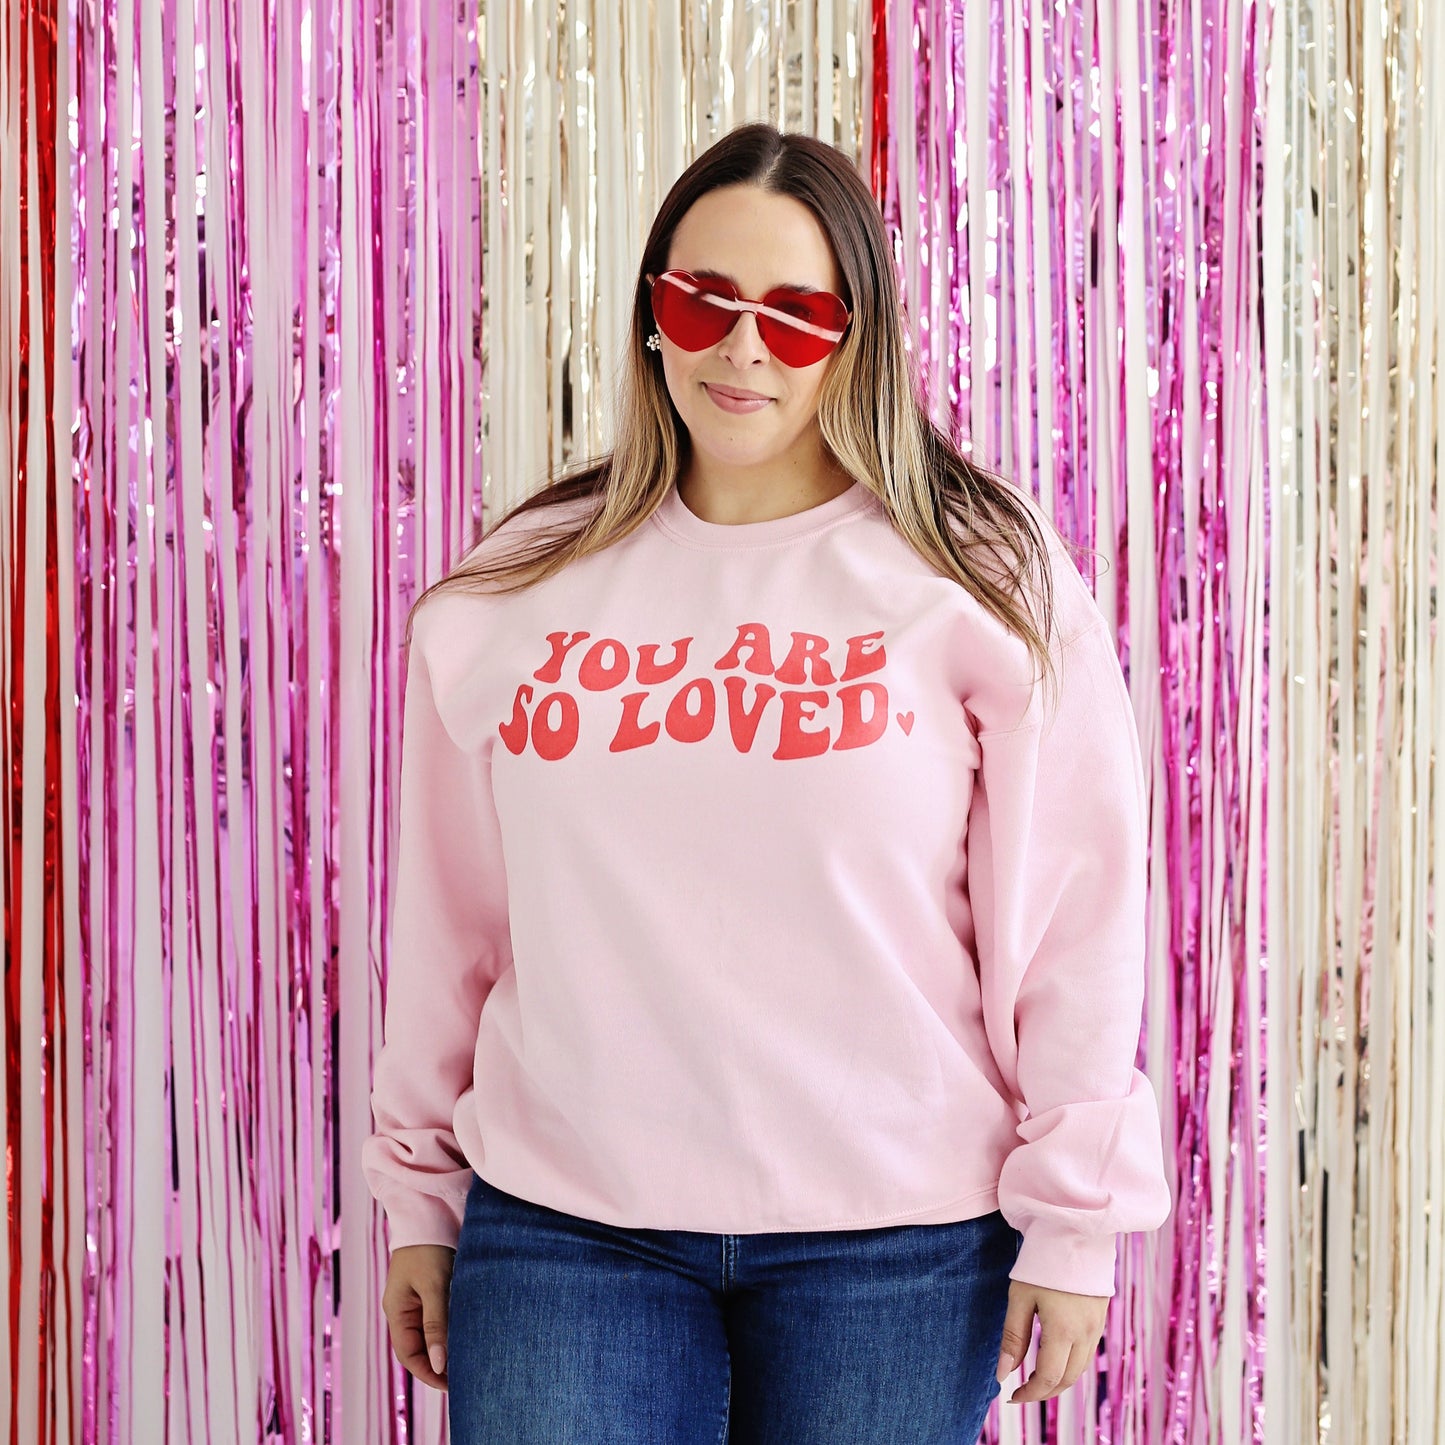 You Are So Loved sweatshirt